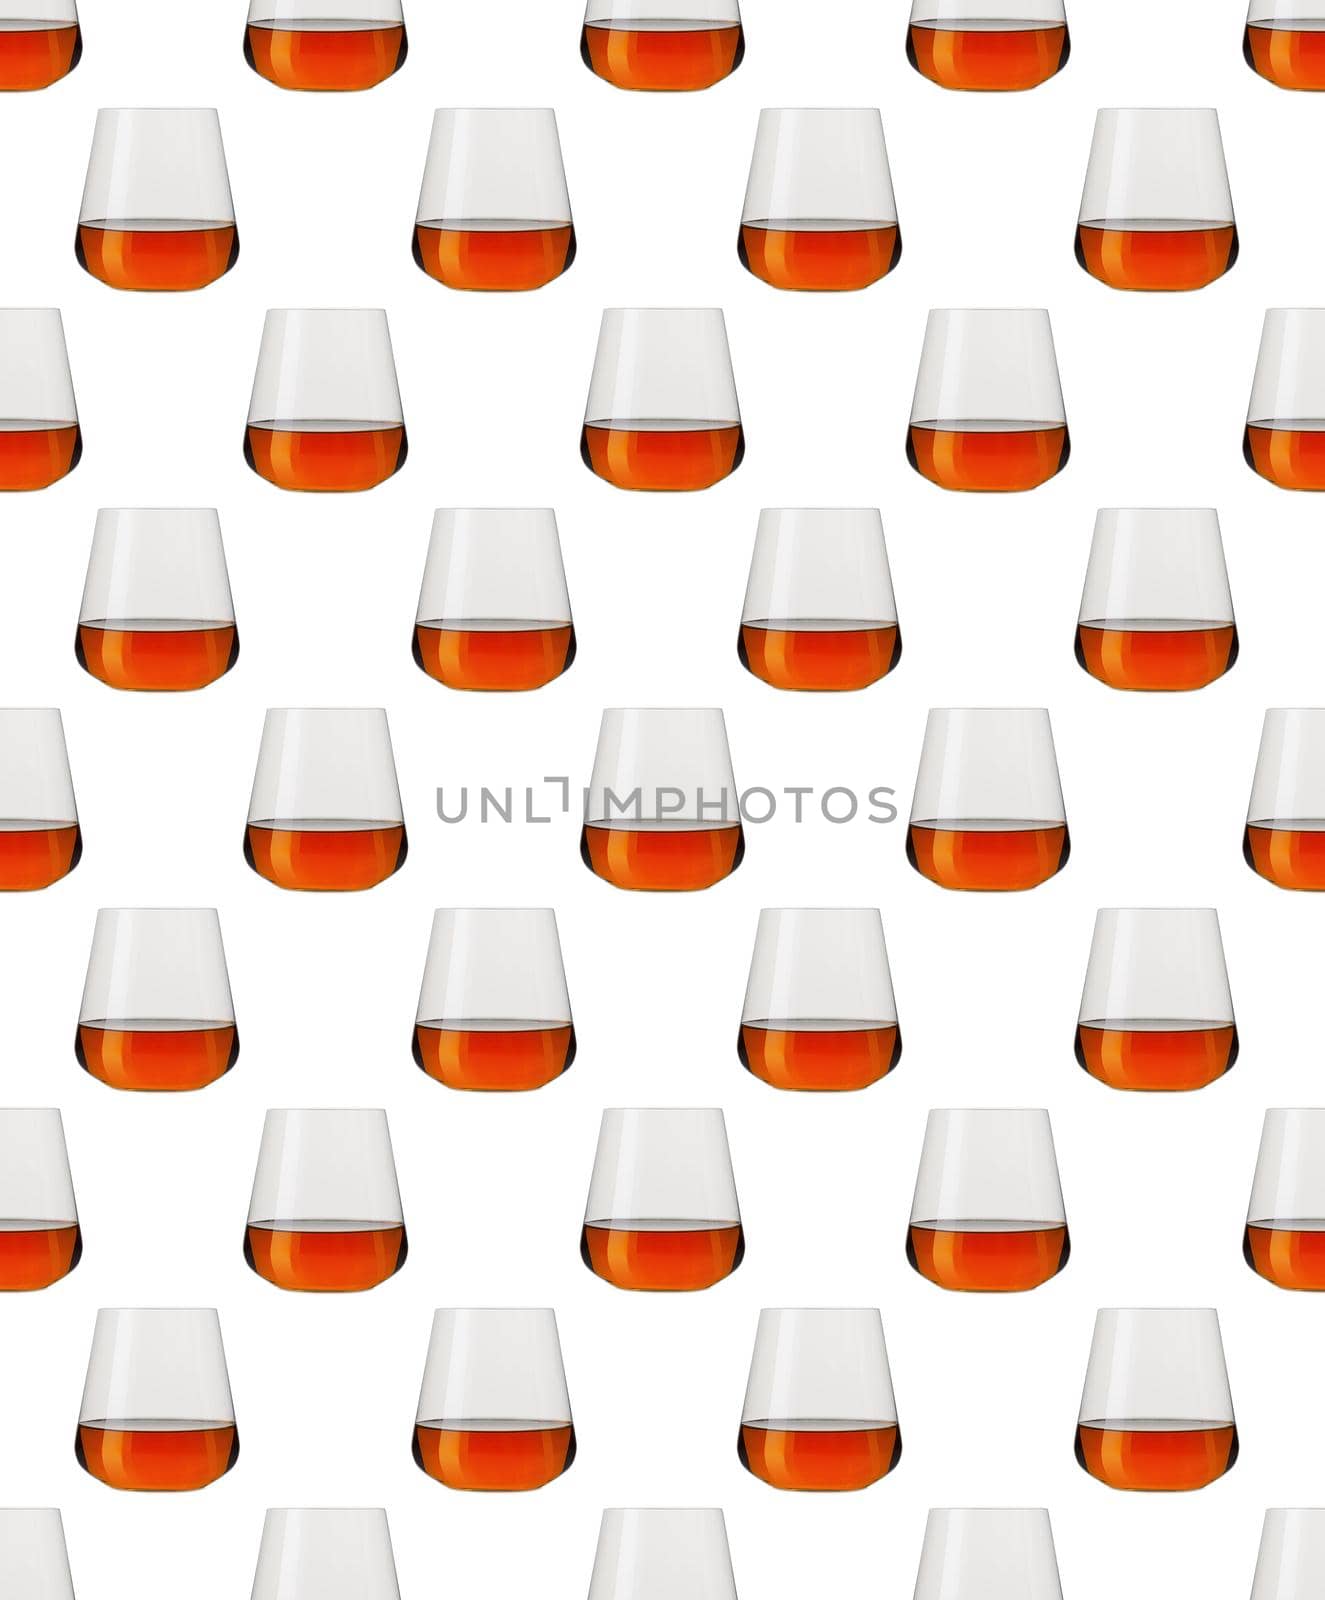 Seamless pattern - glasses of whisky on white background. abstract alcoholic drinks pattern for packaging design.